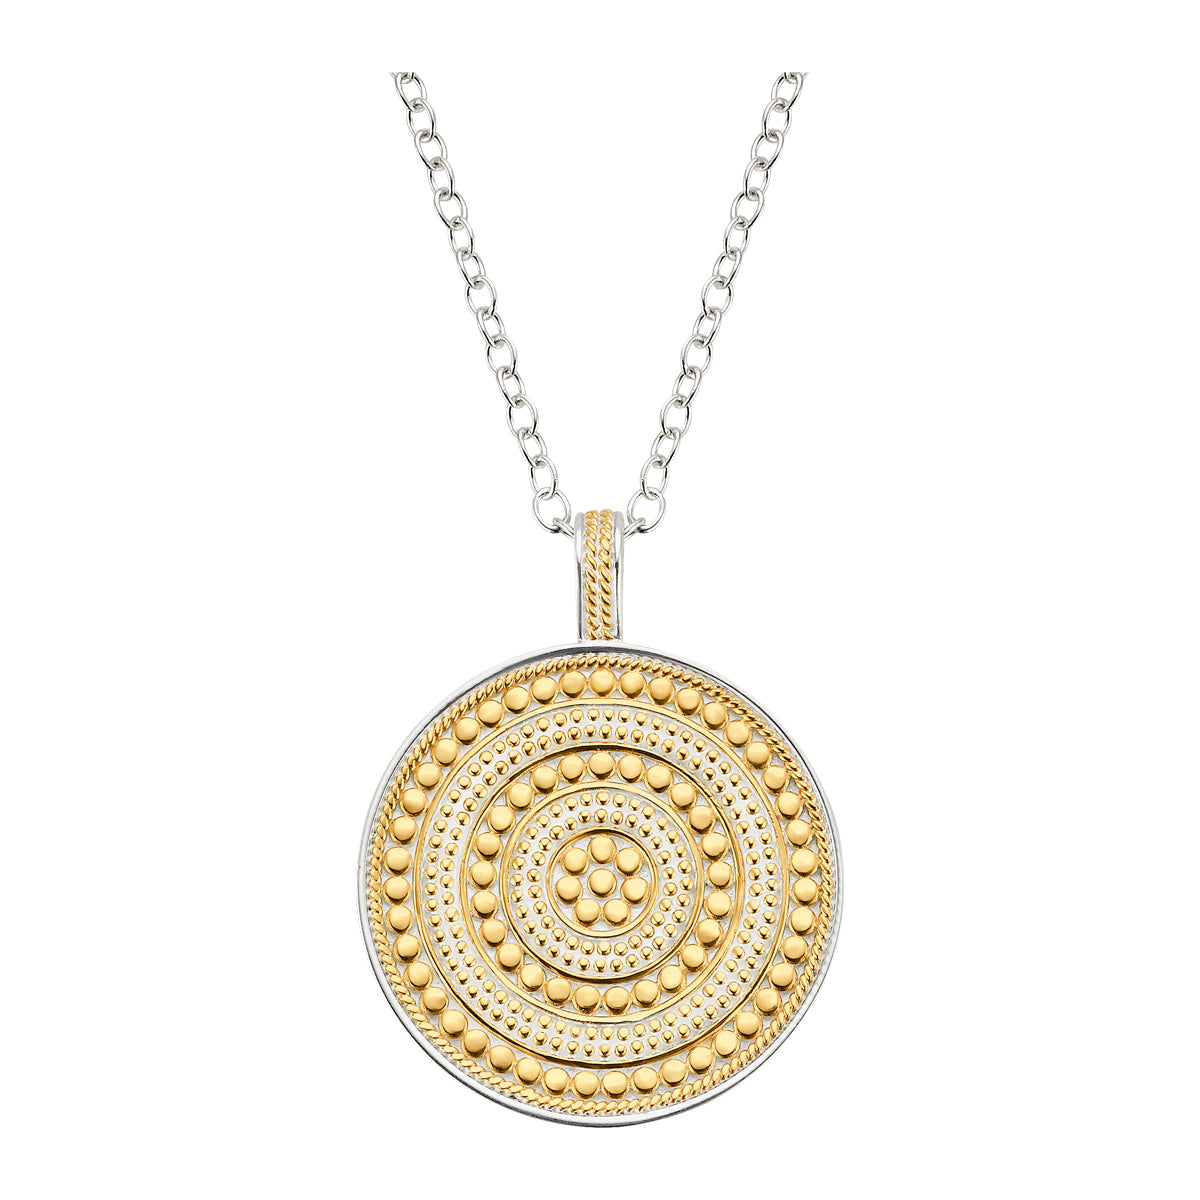 Long pendant necklace in sterling silver with 18K gold dot work